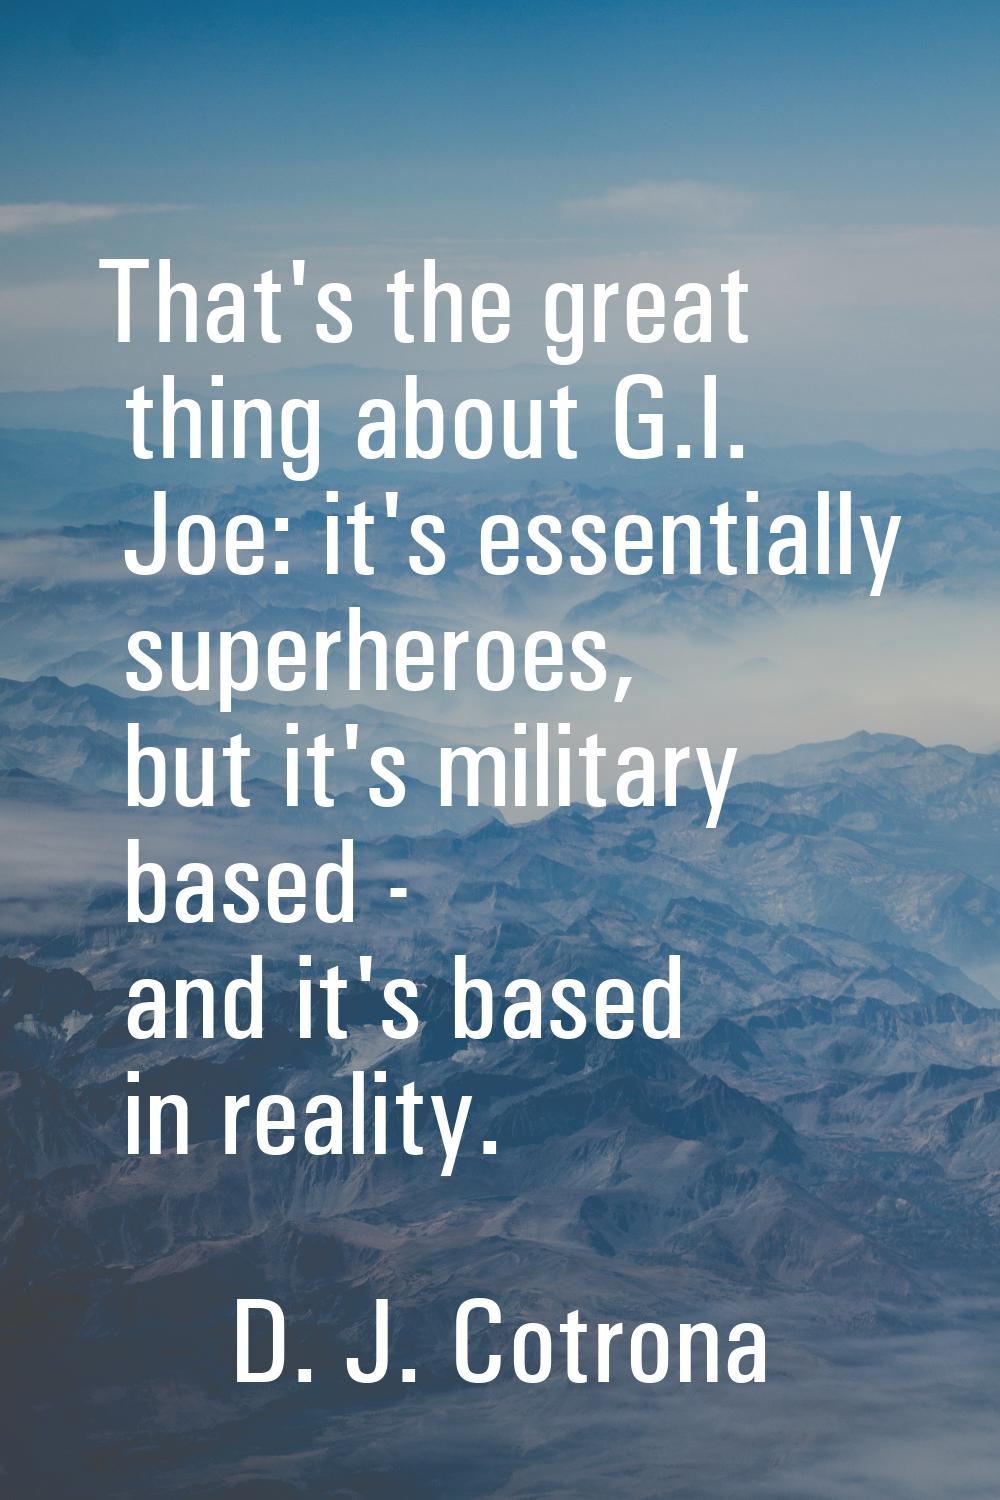 That's the great thing about G.I. Joe: it's essentially superheroes, but it's military based - and 